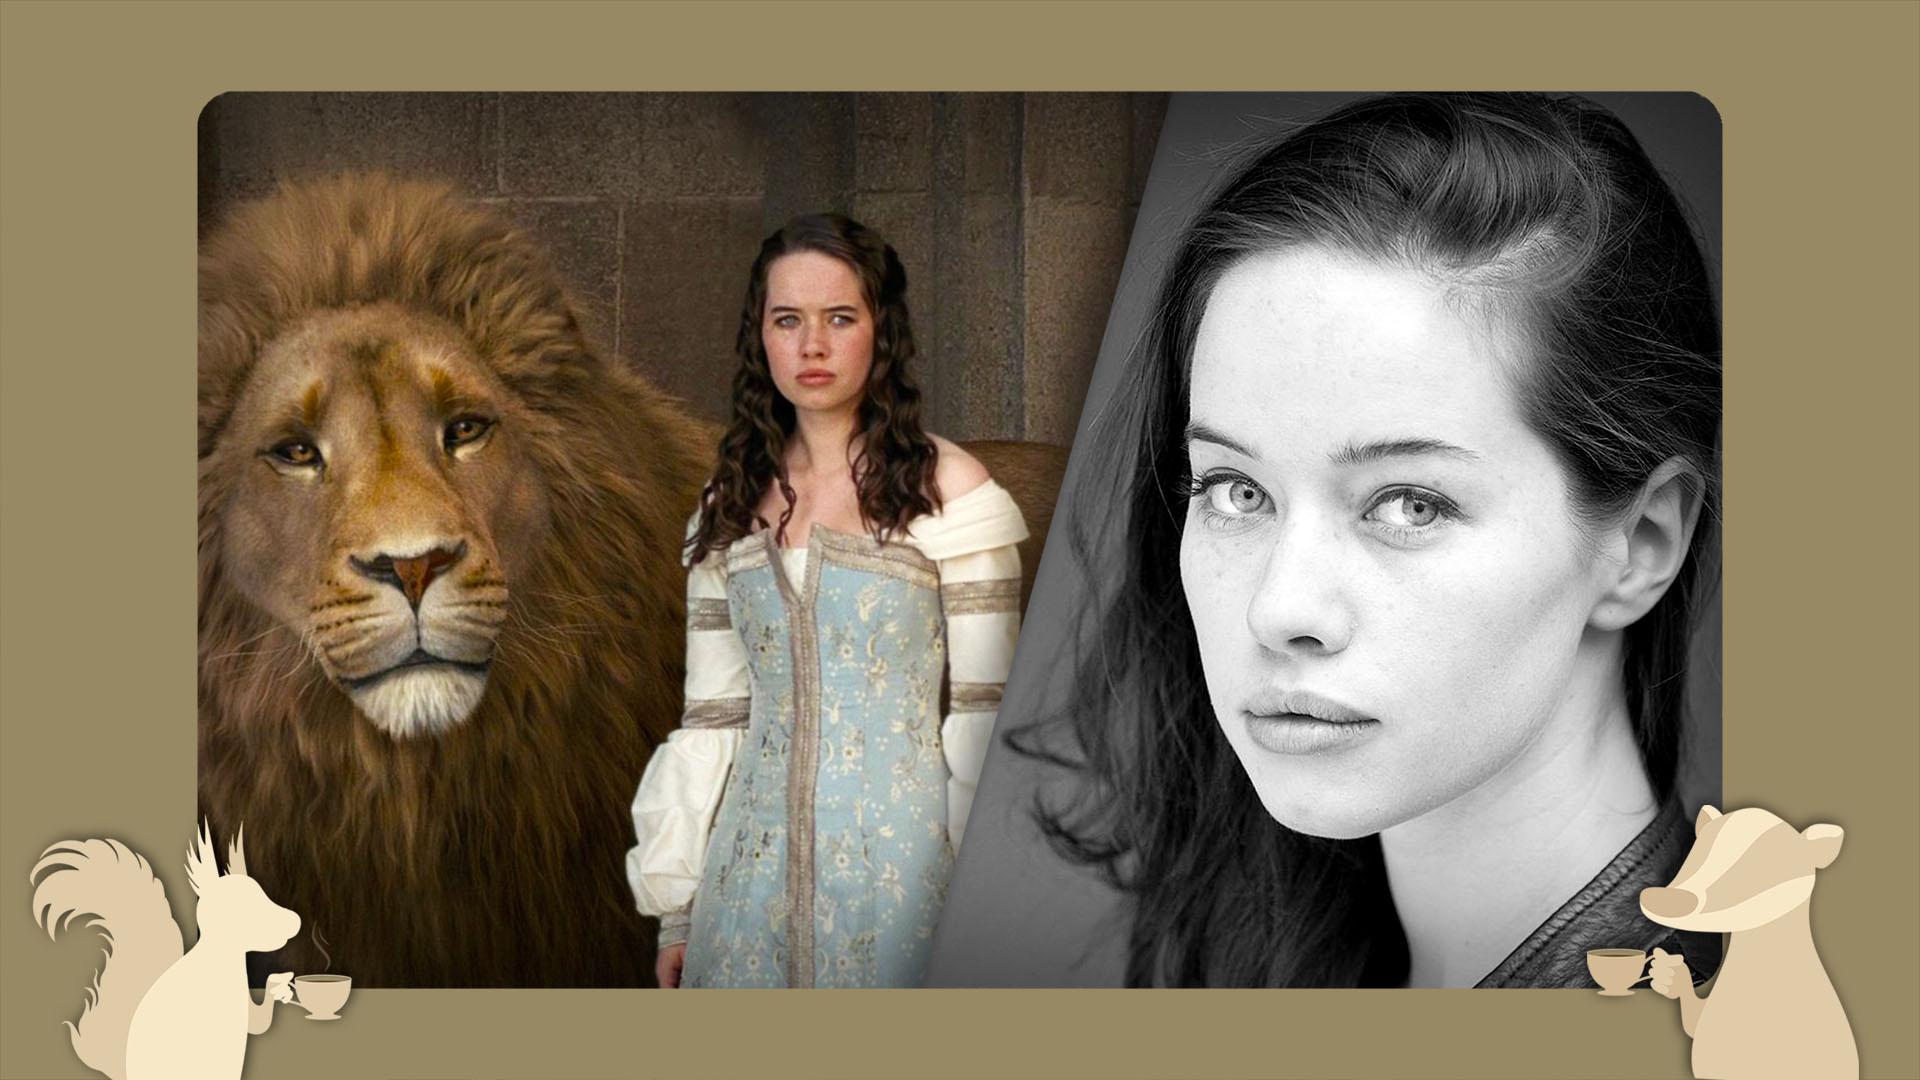 The Magnificent and The Gentle  Chronicles of narnia, Narnia prince  caspian, Narnia cast